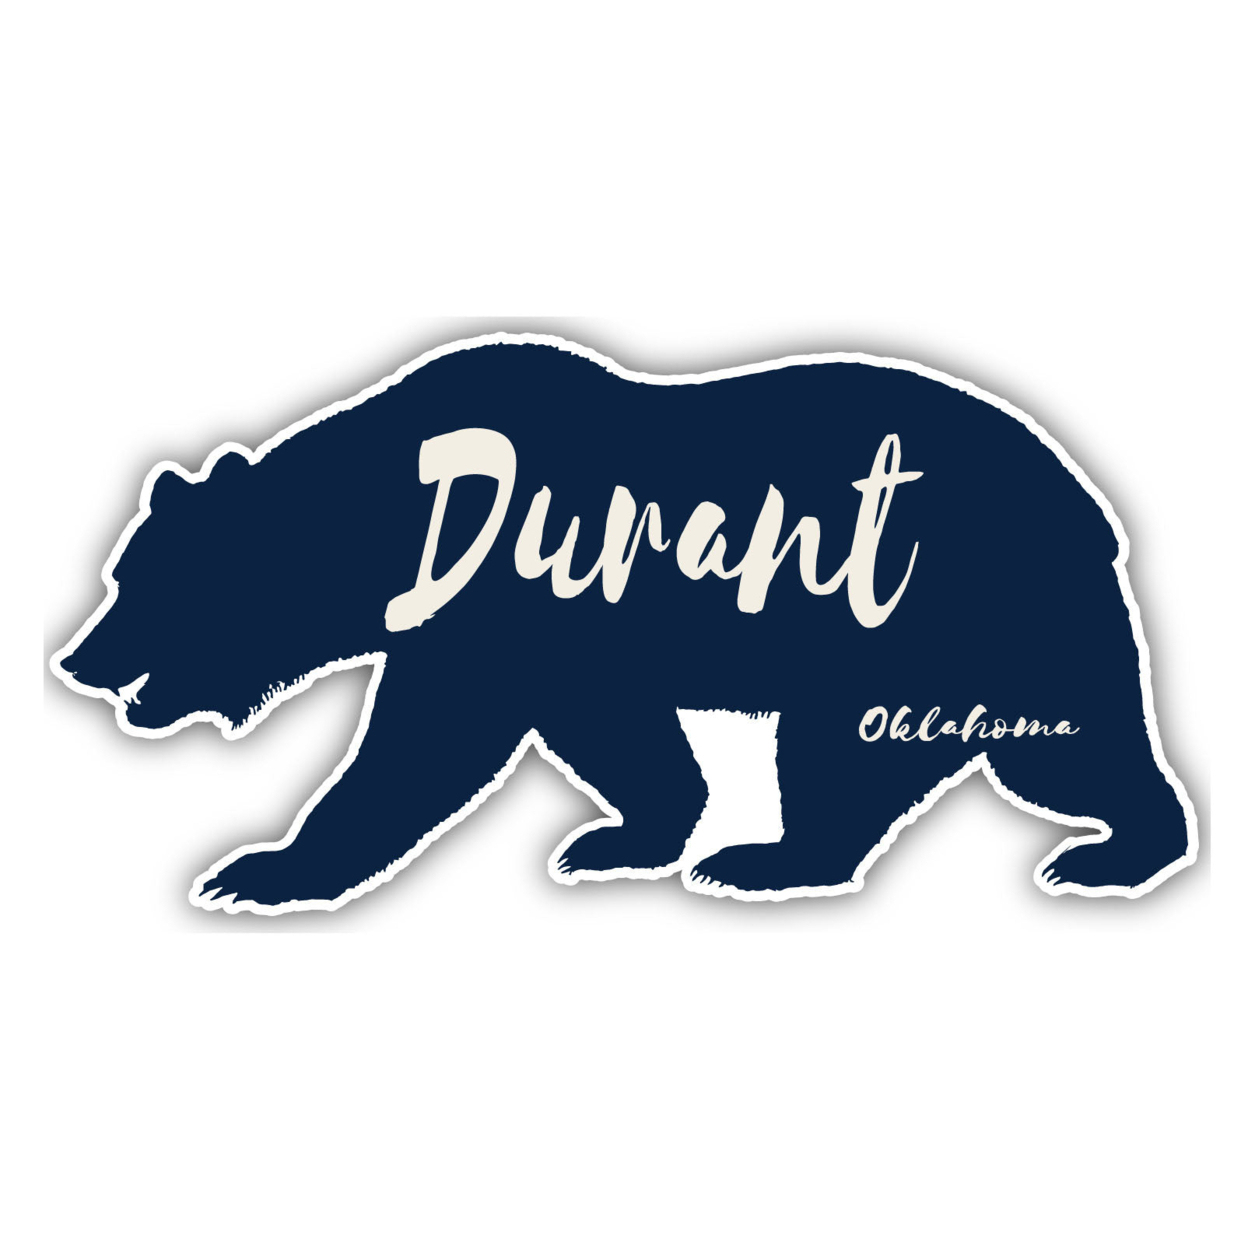 Durant Oklahoma Souvenir Decorative Stickers (Choose Theme And Size) - 4-Pack, 8-Inch, Tent